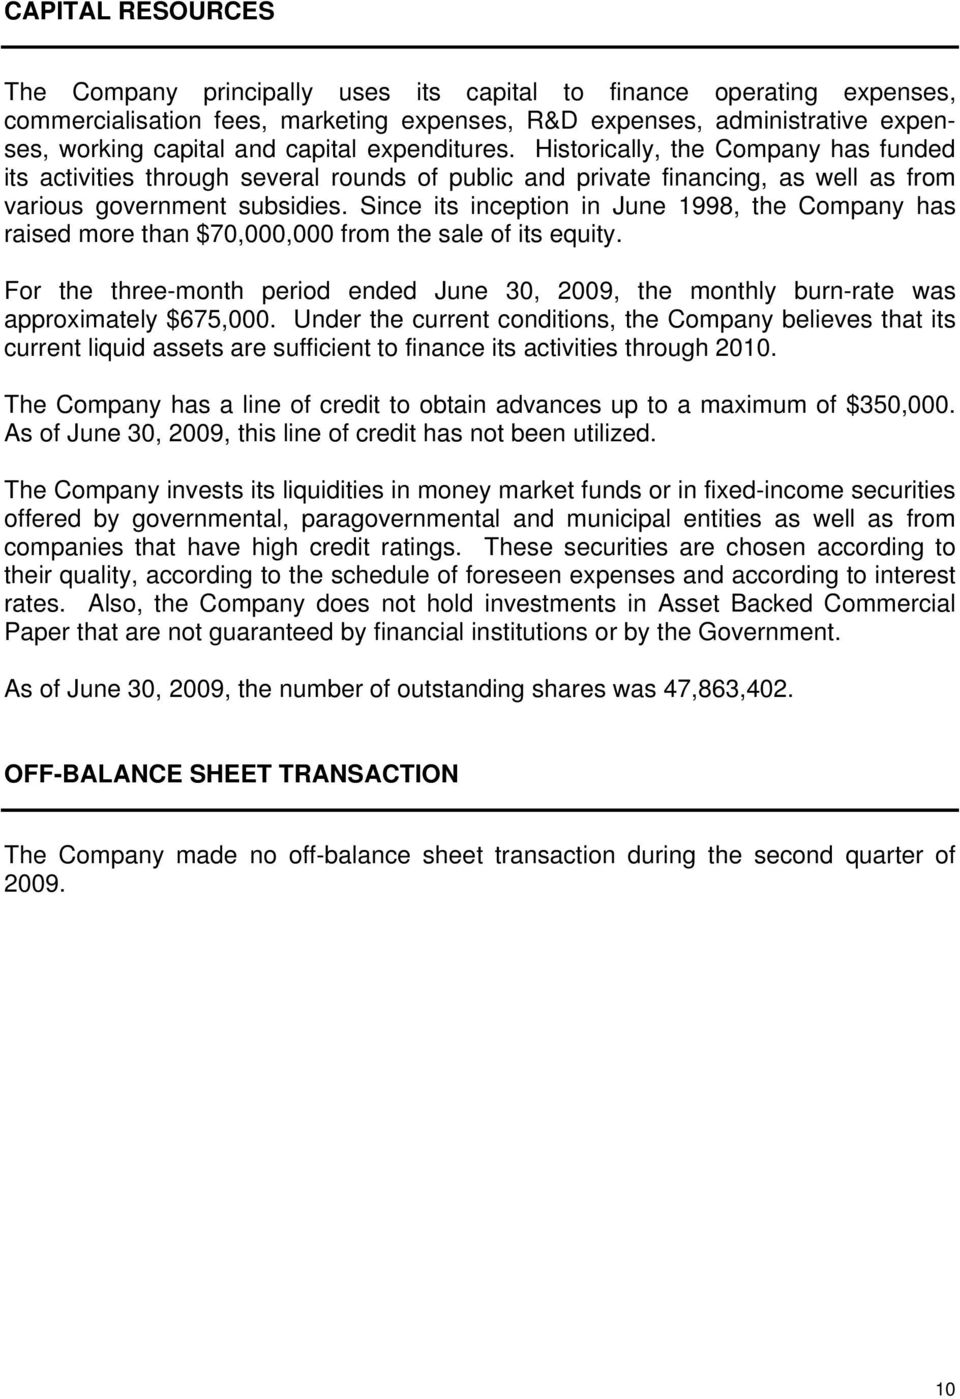 Since its inception in June 1998, the Company has raised more than $70,000,000 from the sale of its equity.